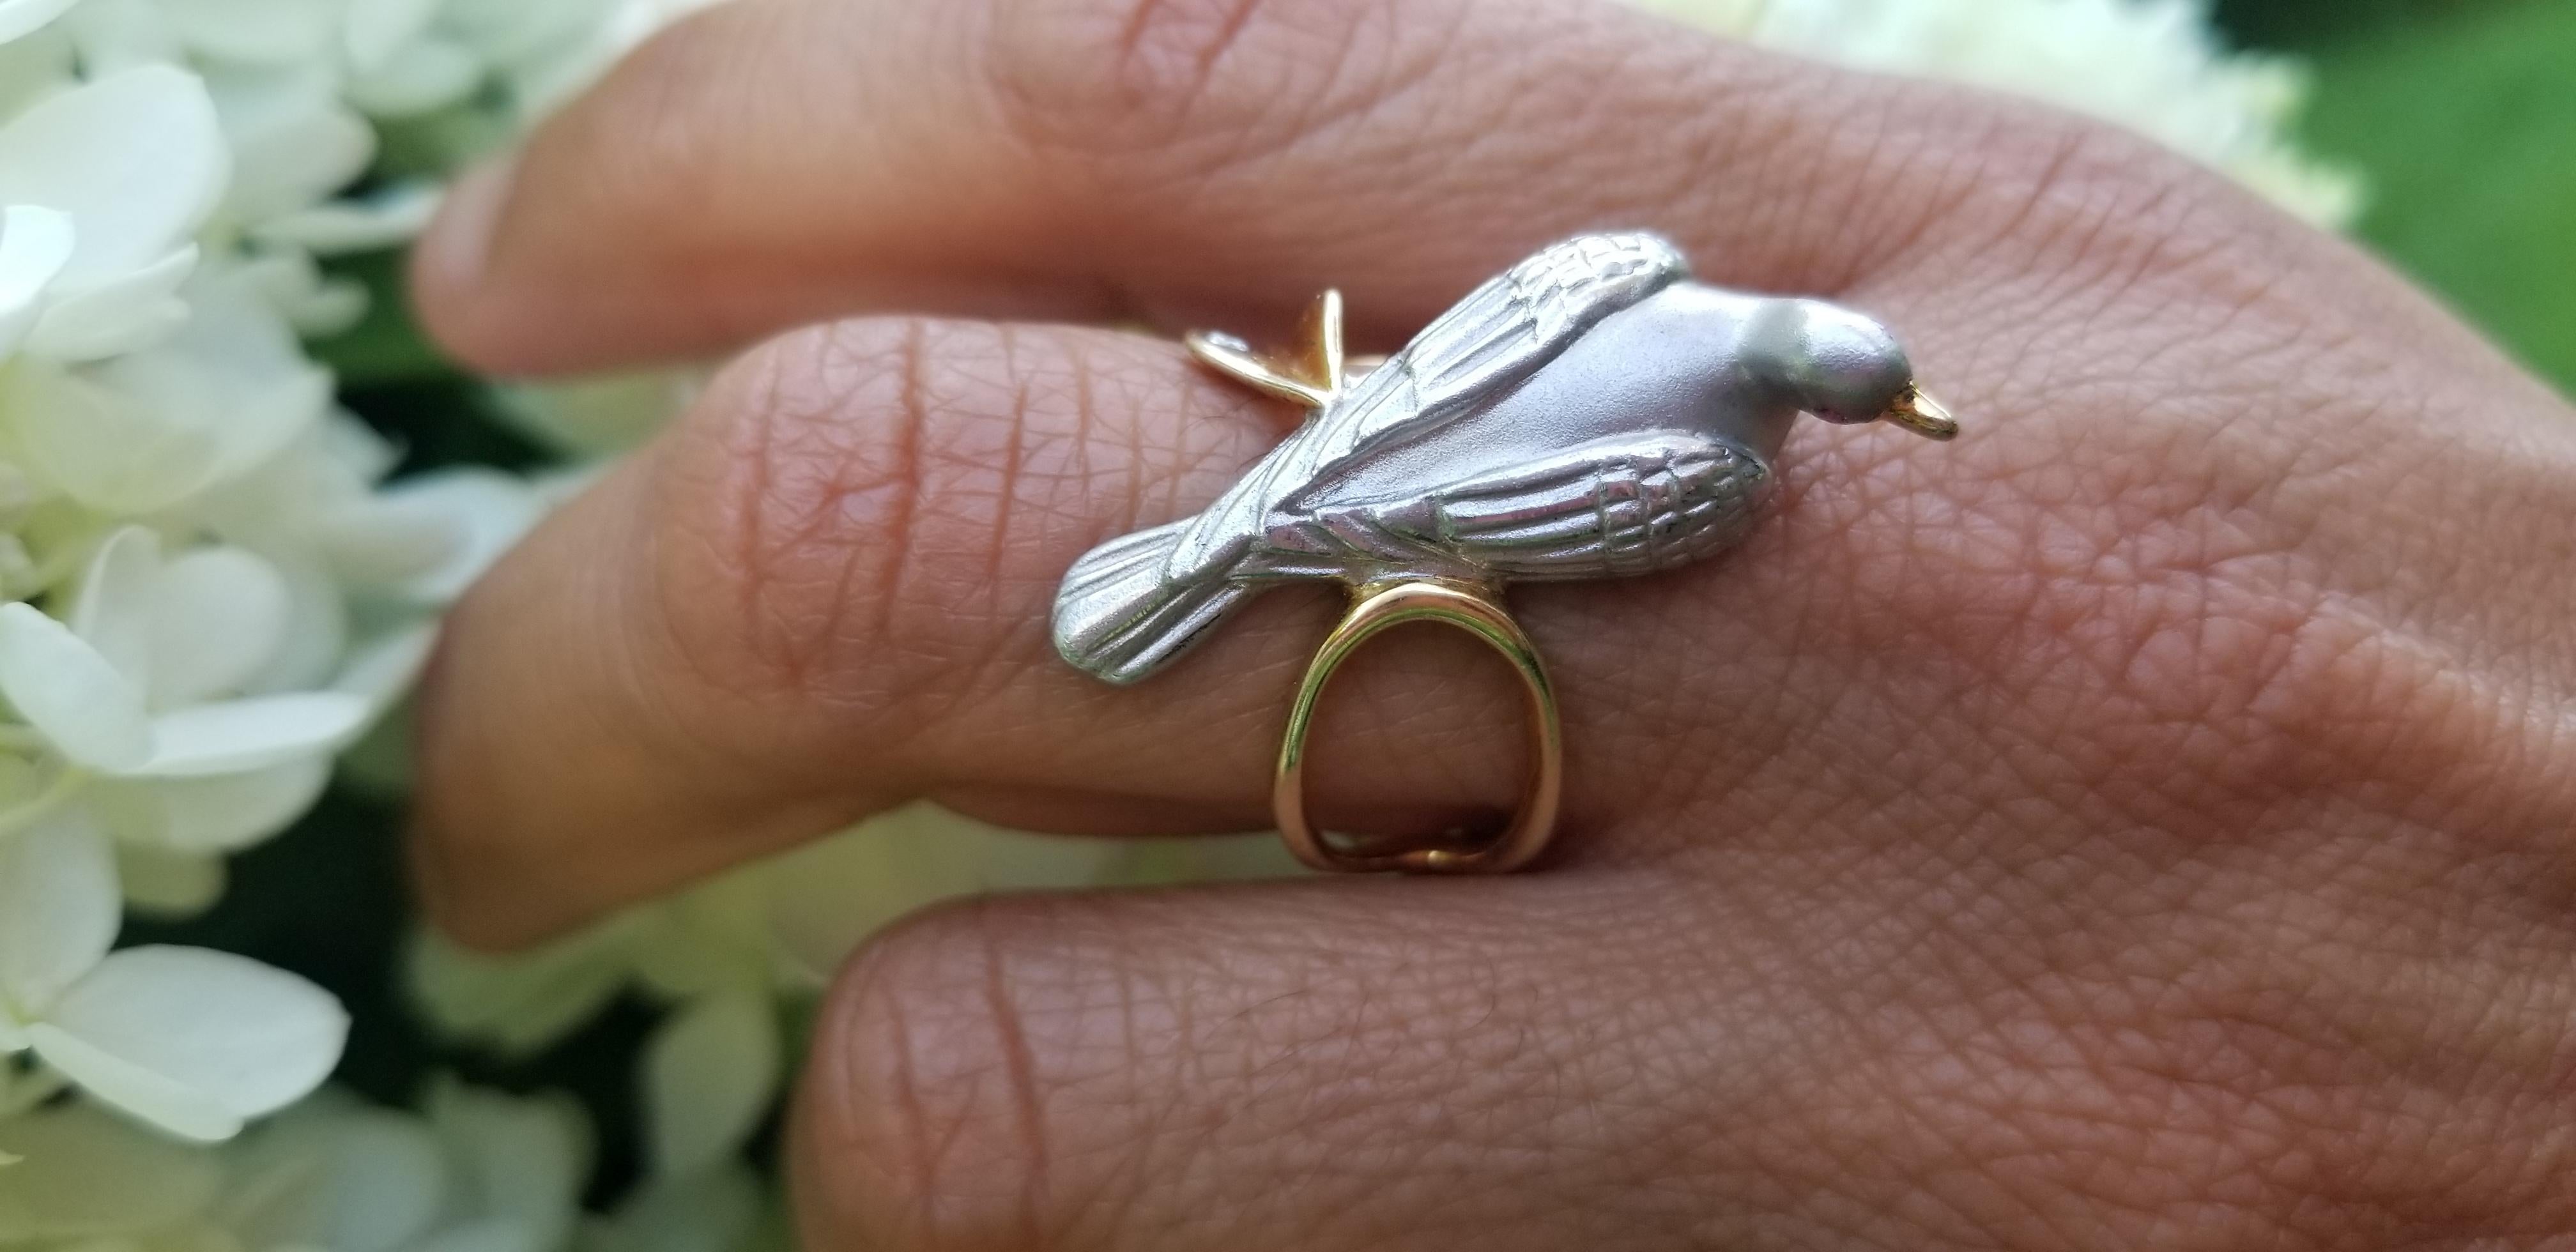 This graceful dove ring was originally hand-carved by New York-based designer Manya of the design team Manya & Roumen. The sinuous gold-plated vine wraps around the finger. A single heart-shaped leaf gently cradled a single white diaming which is